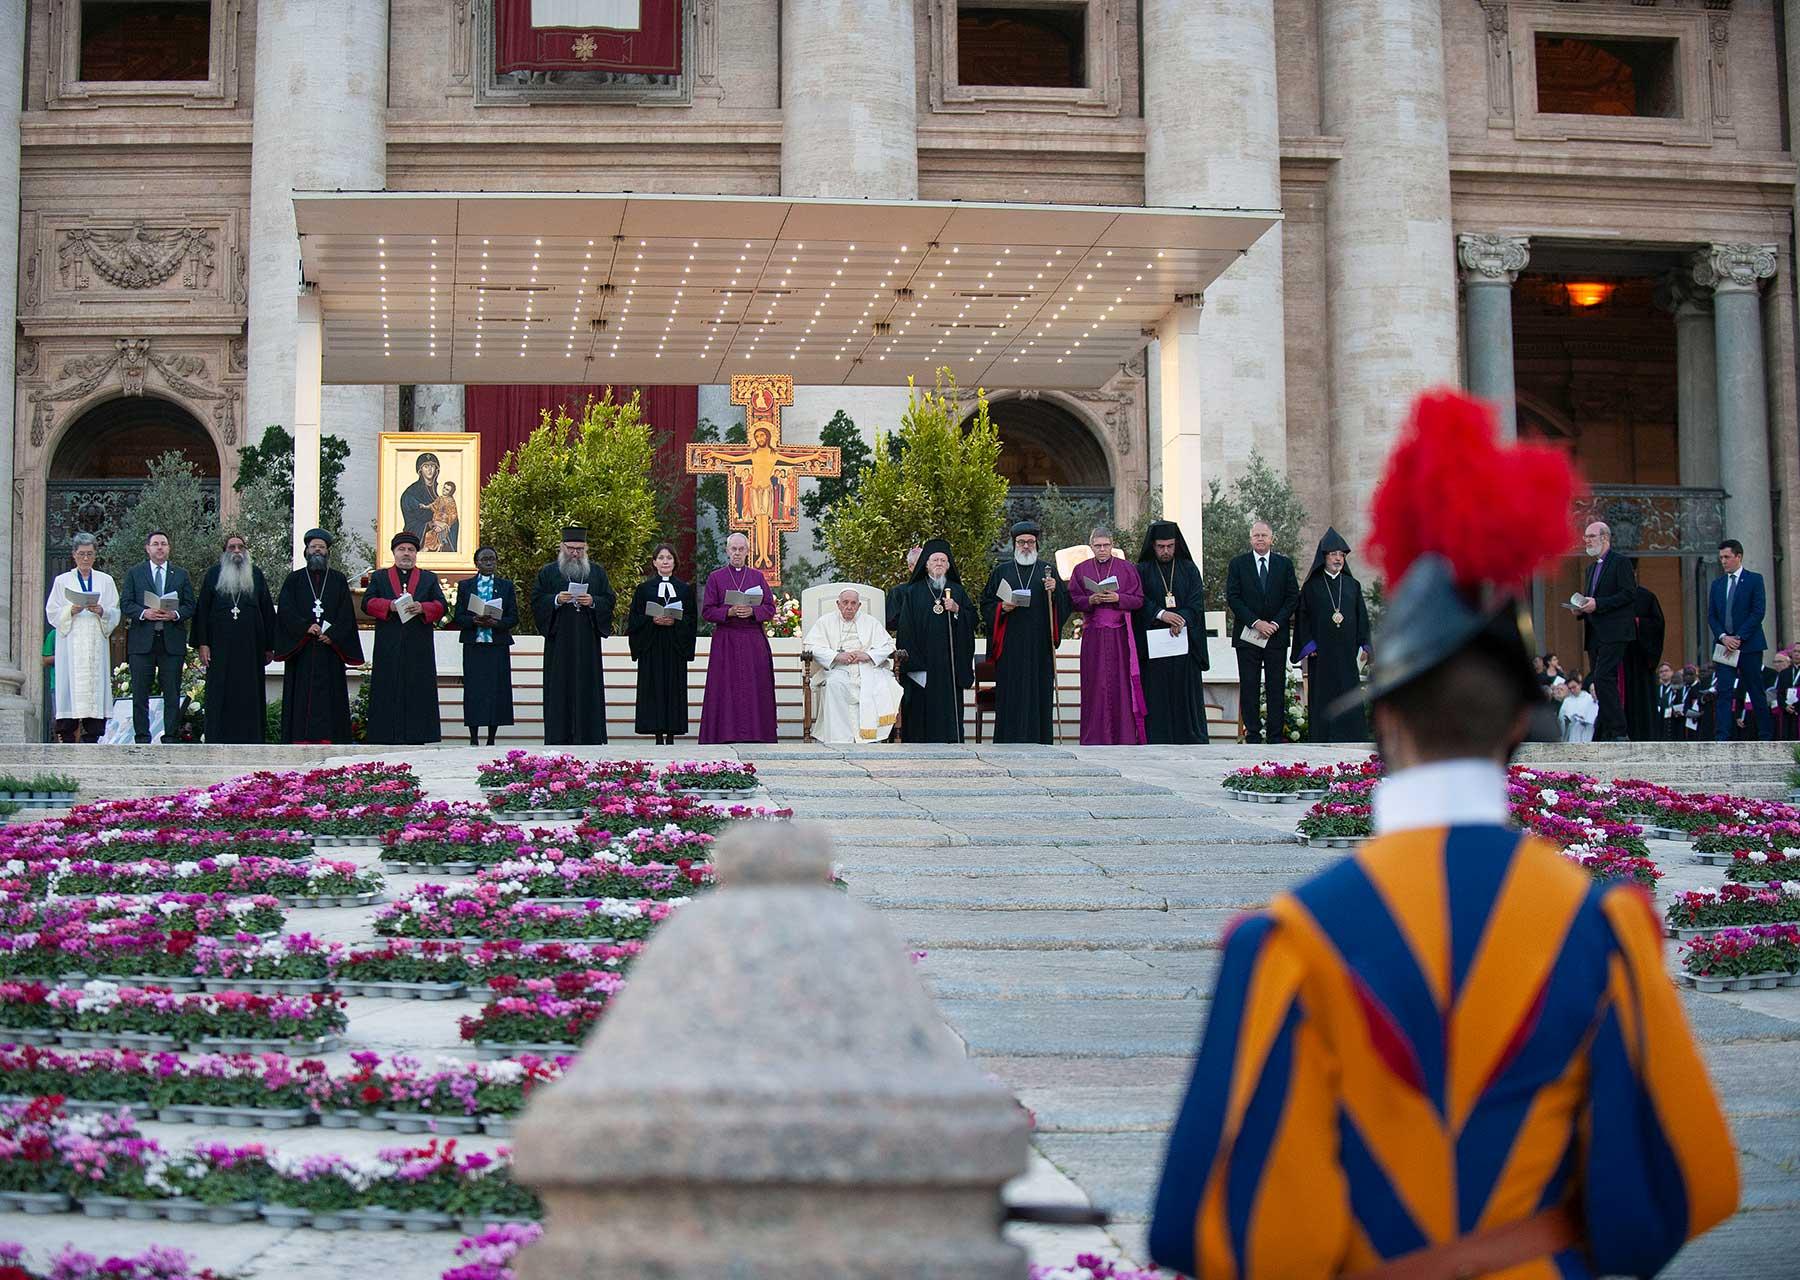 LWF General Secretary Anne Burghardt (8th from left) with Pope Francis (10th from left) and the leaders of many different Christian churches at a Taizé prayer vigil in St Peter’s Square. Photo: CatholicPressPhoto/Alessia Giuliani